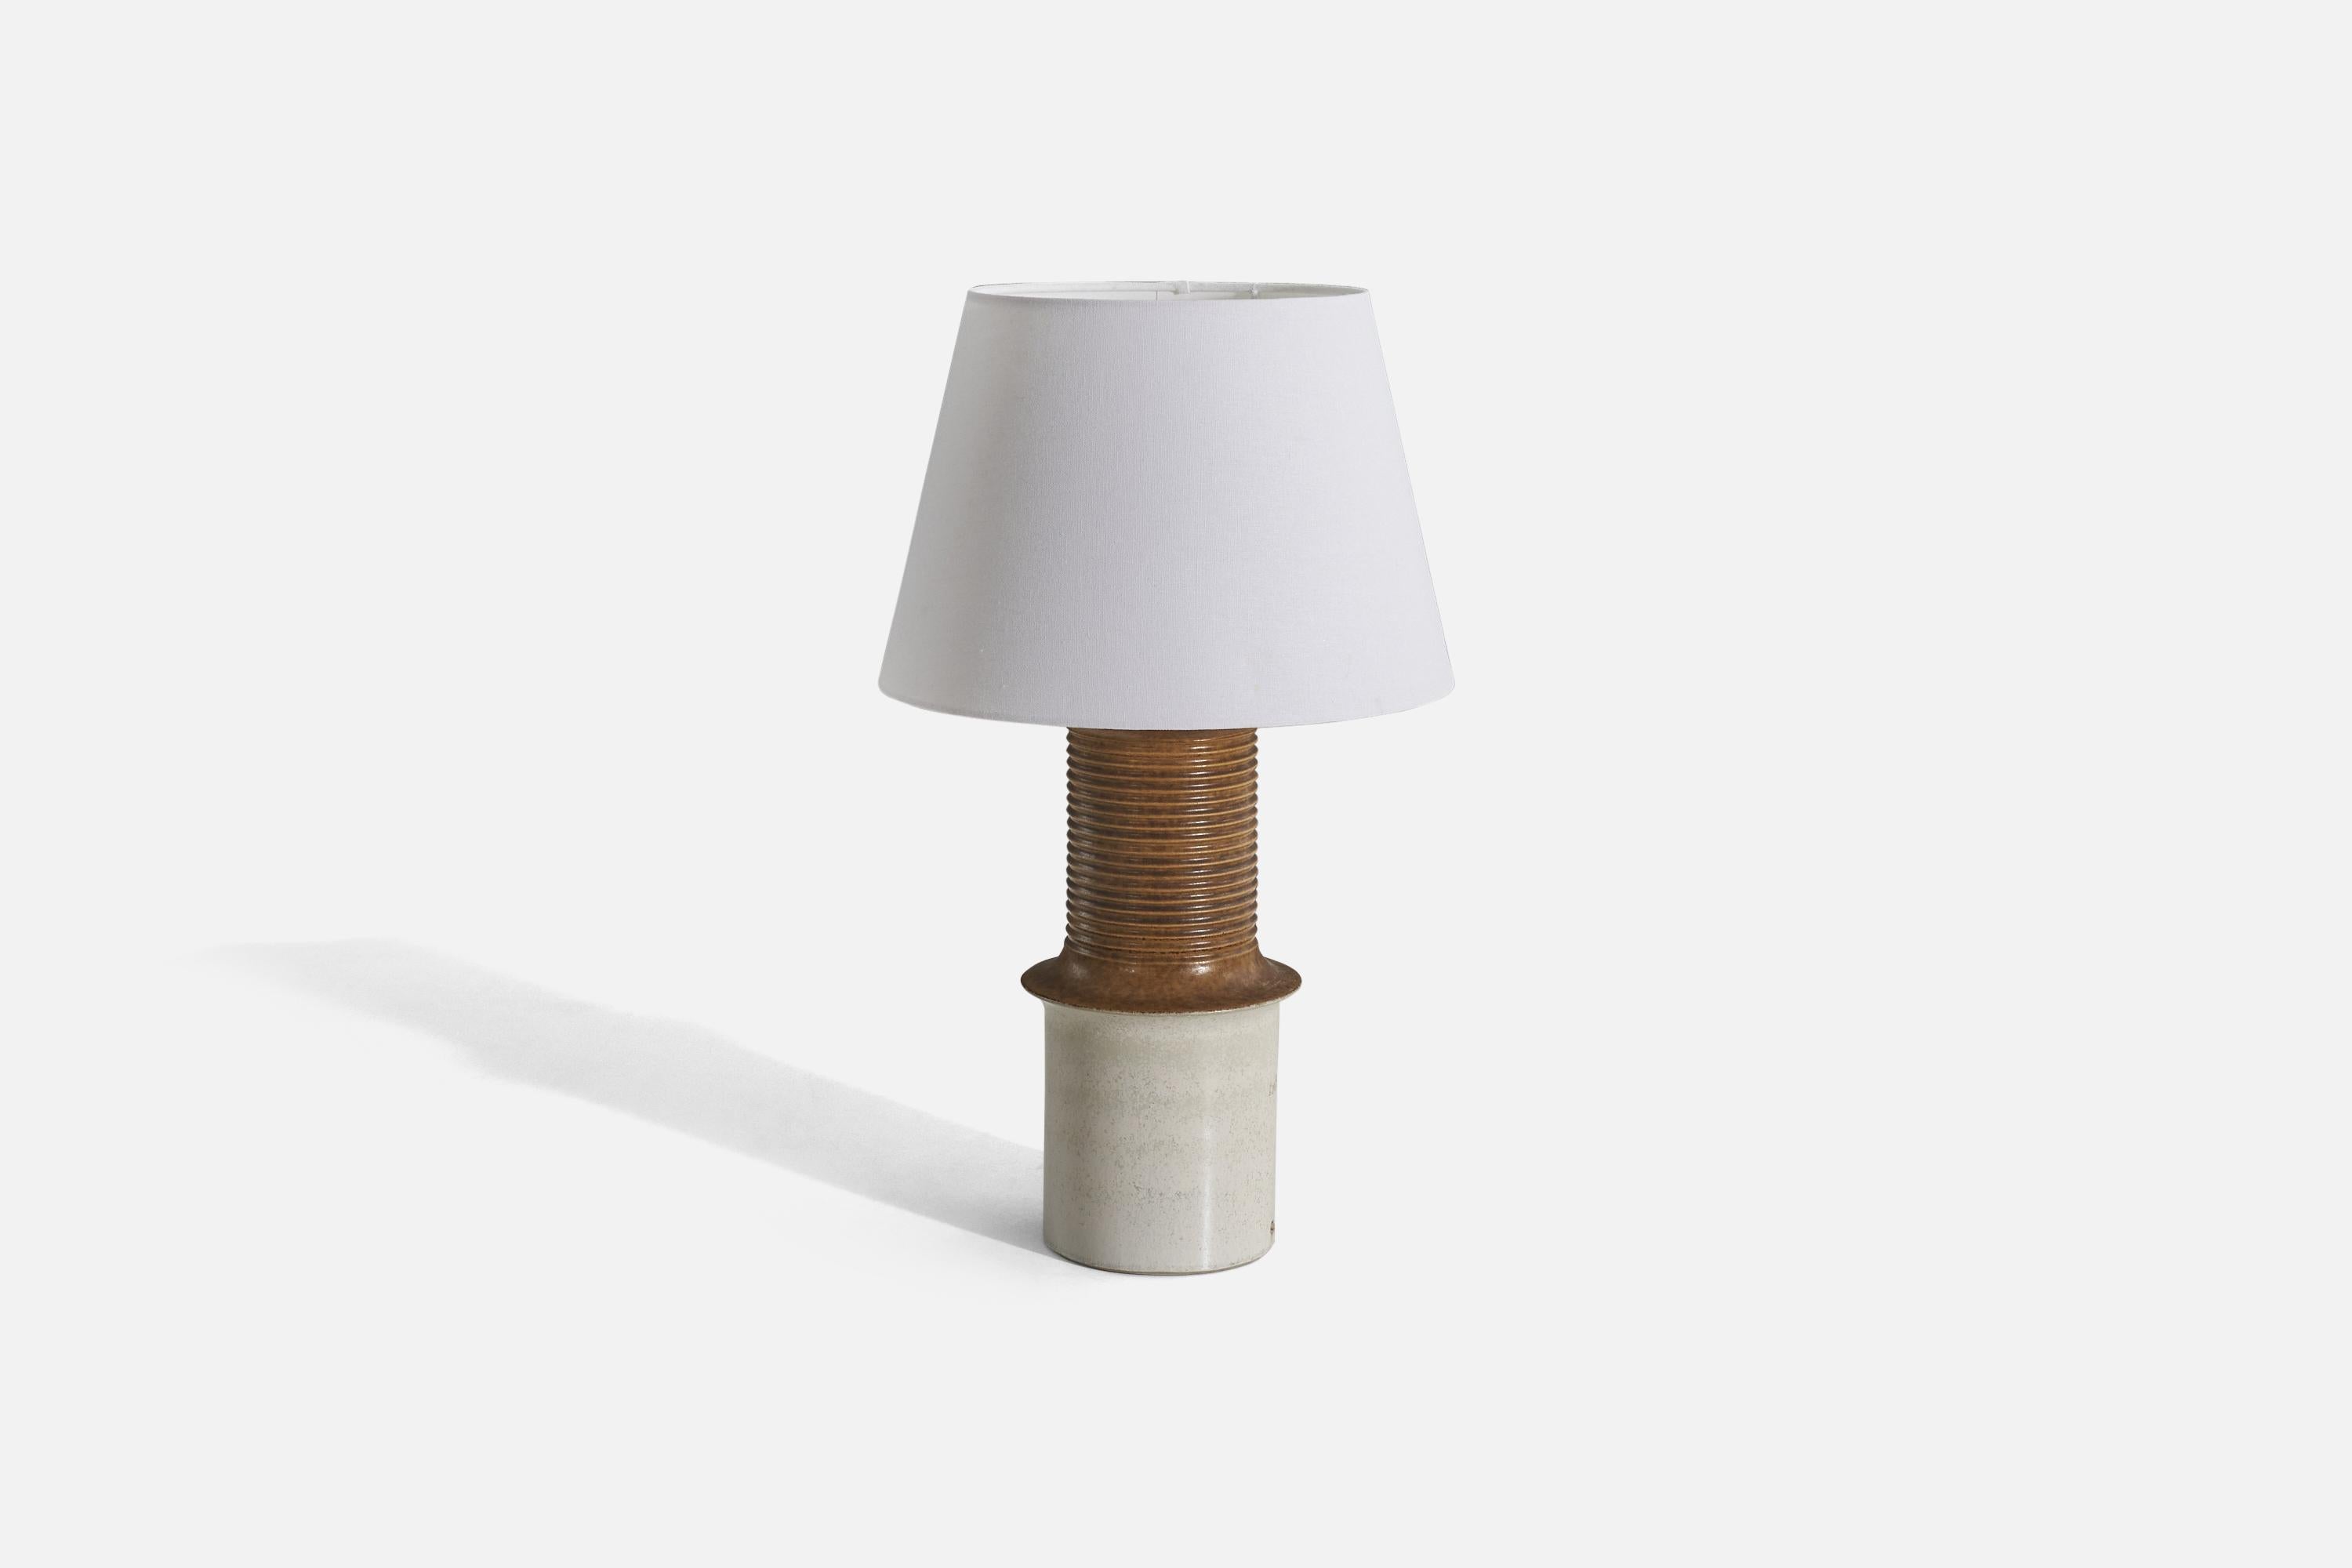 A white and brown-glazed stoneware and fabric table lamp designed and produced by Ego Stengods, Sweden, c. 1960s.

Sold with lampshade. 
Dimensions of lamp (inches) : 17.06 x 6.93 x 6.93 (height x width x depth)
Dimensions of shade (inches) :